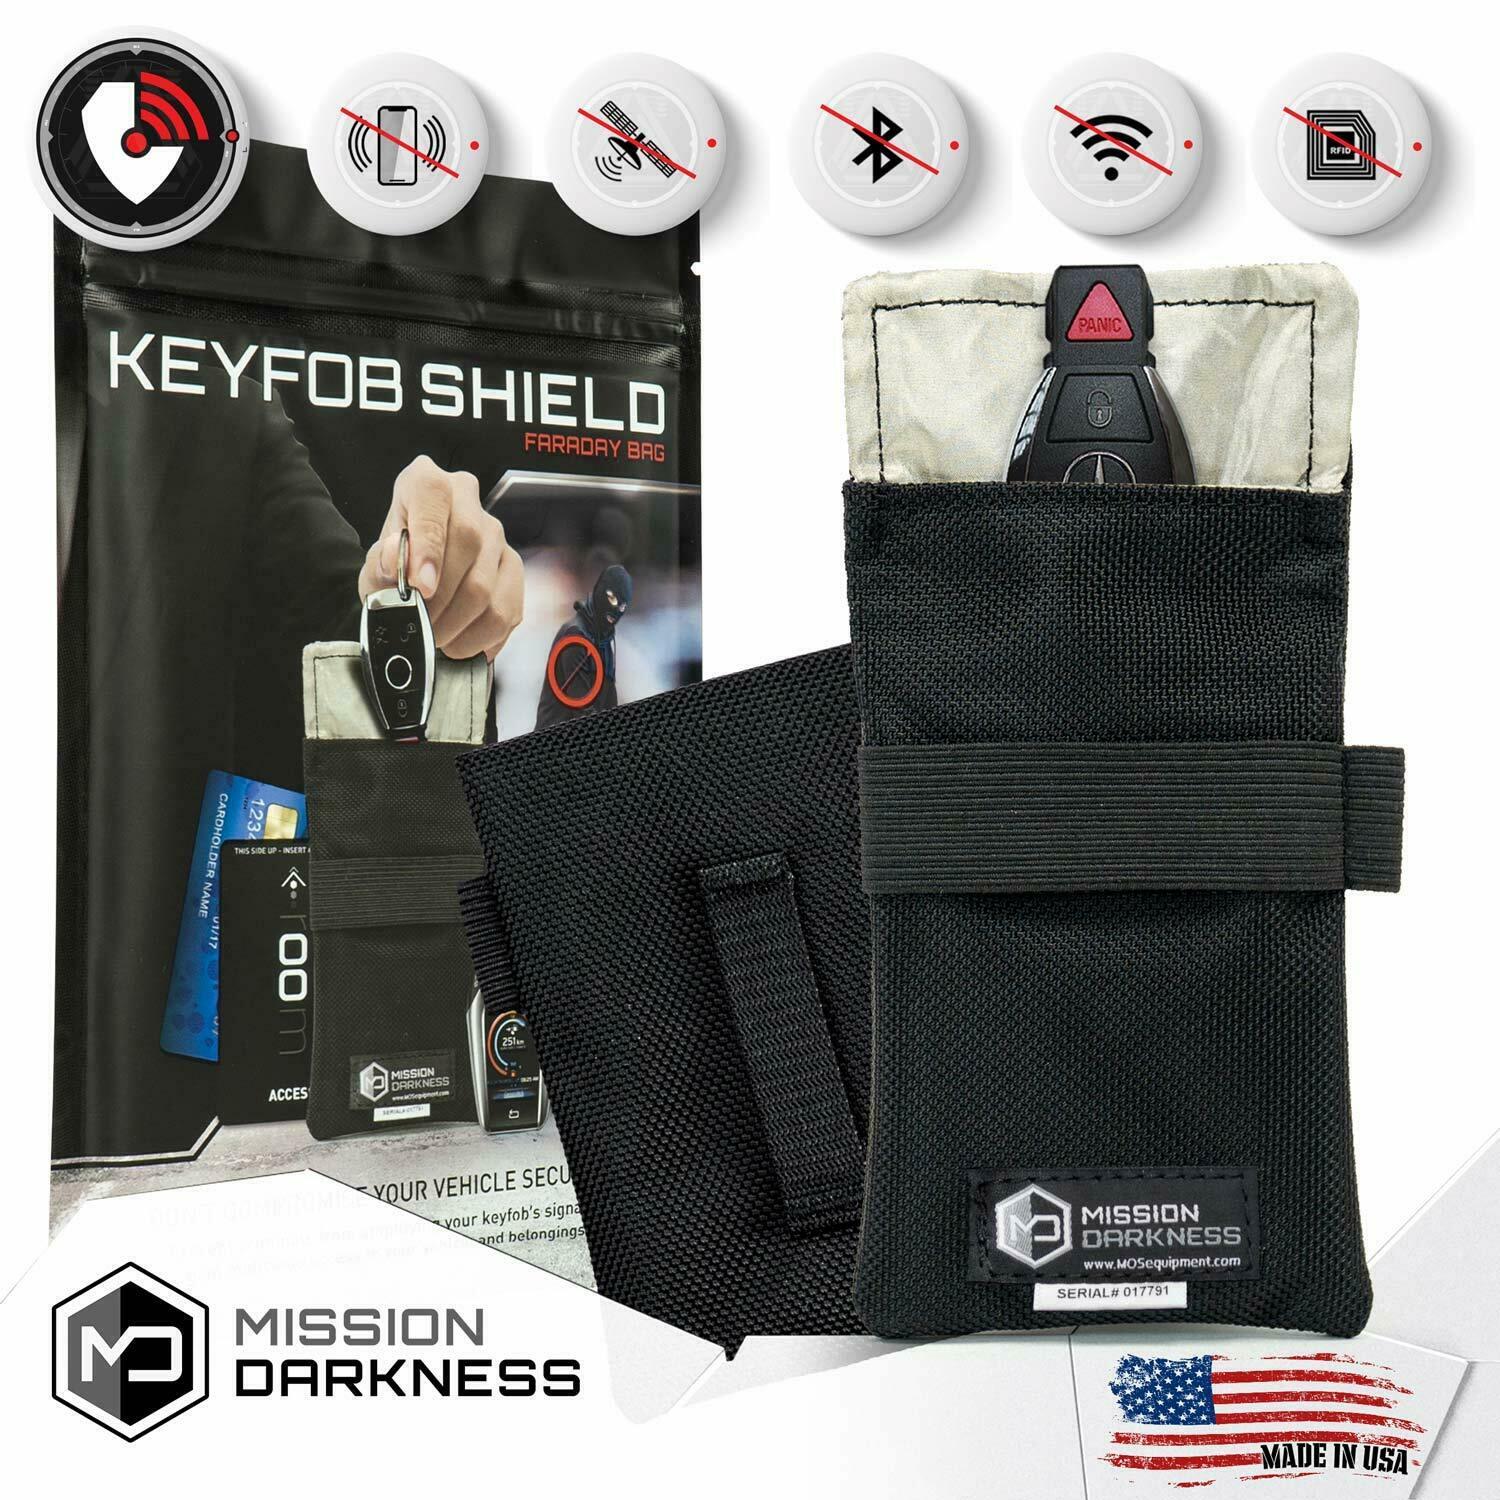 Mission Darkness Faraday Bag For Keyfobs - Anti-hacking Vehicle Security Pouch